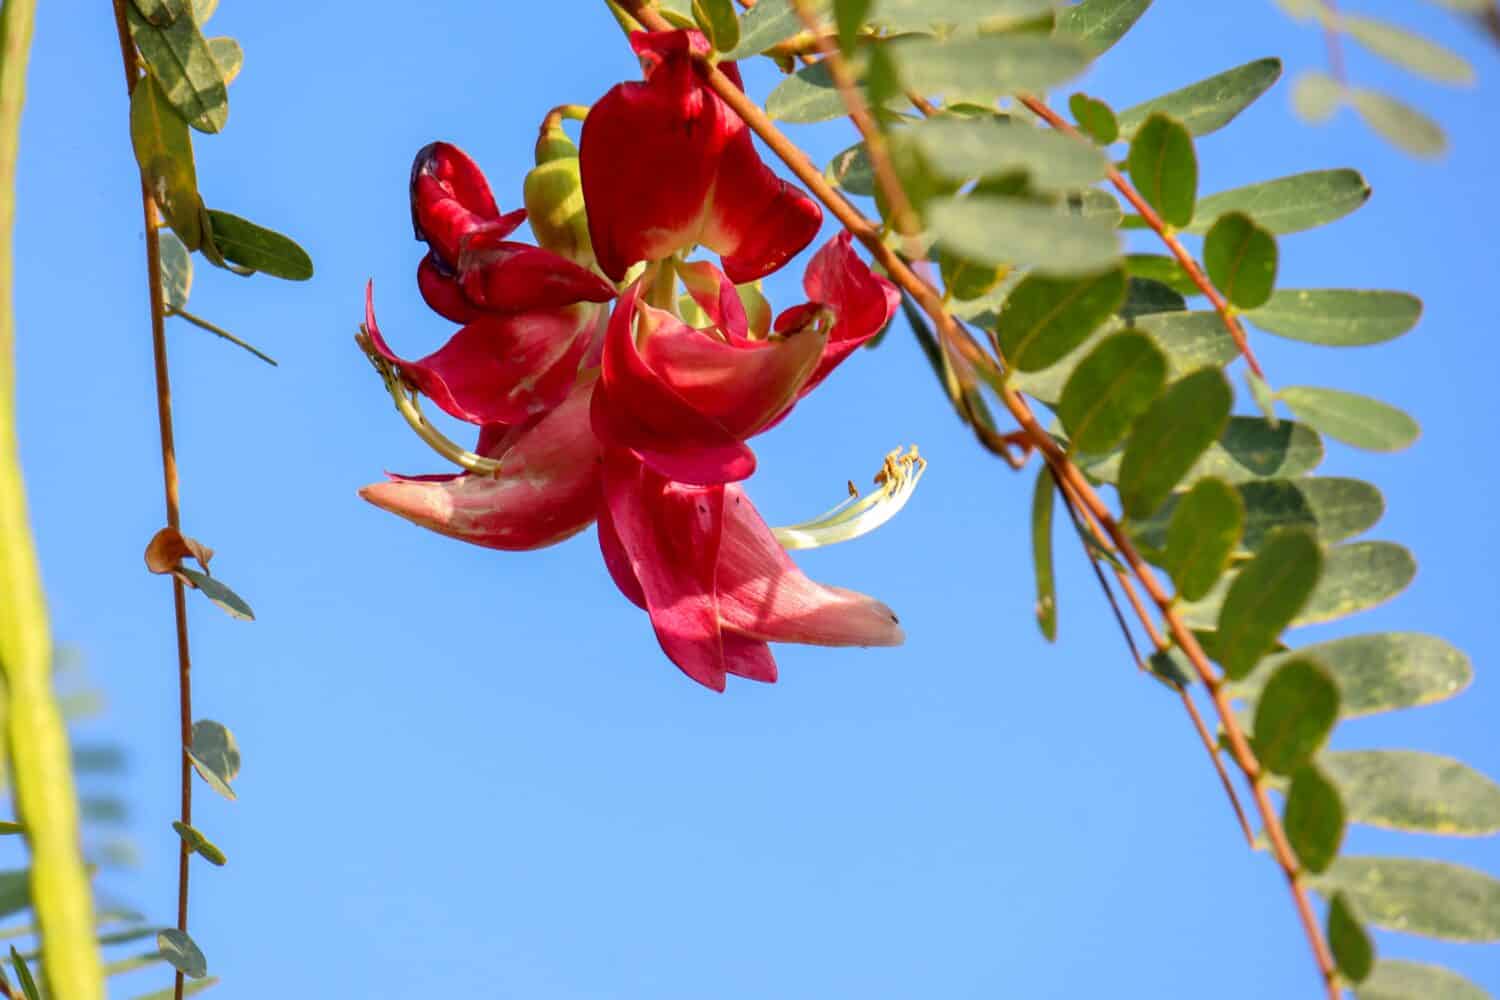 beautiful photo of a red turi flower Sesbania grandiflora is a small tree belonging to the Fabaceae tribe. agati or hummingbird tree, is a small soft woody tree whose flowers can be eaten as vegetable